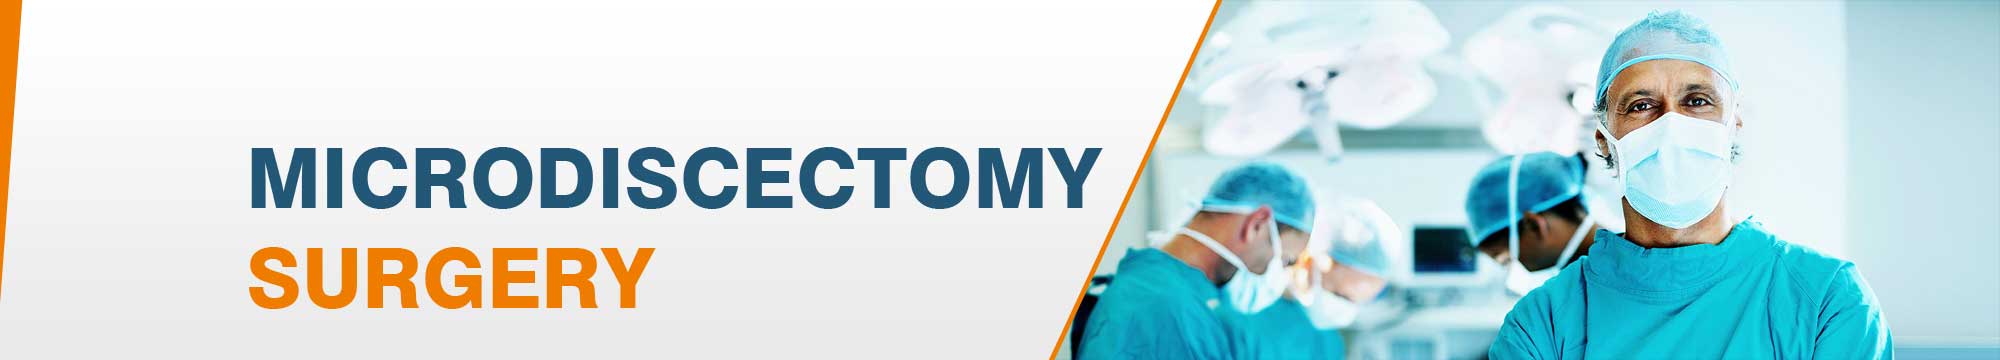 Microdiscectomy Surgery in India